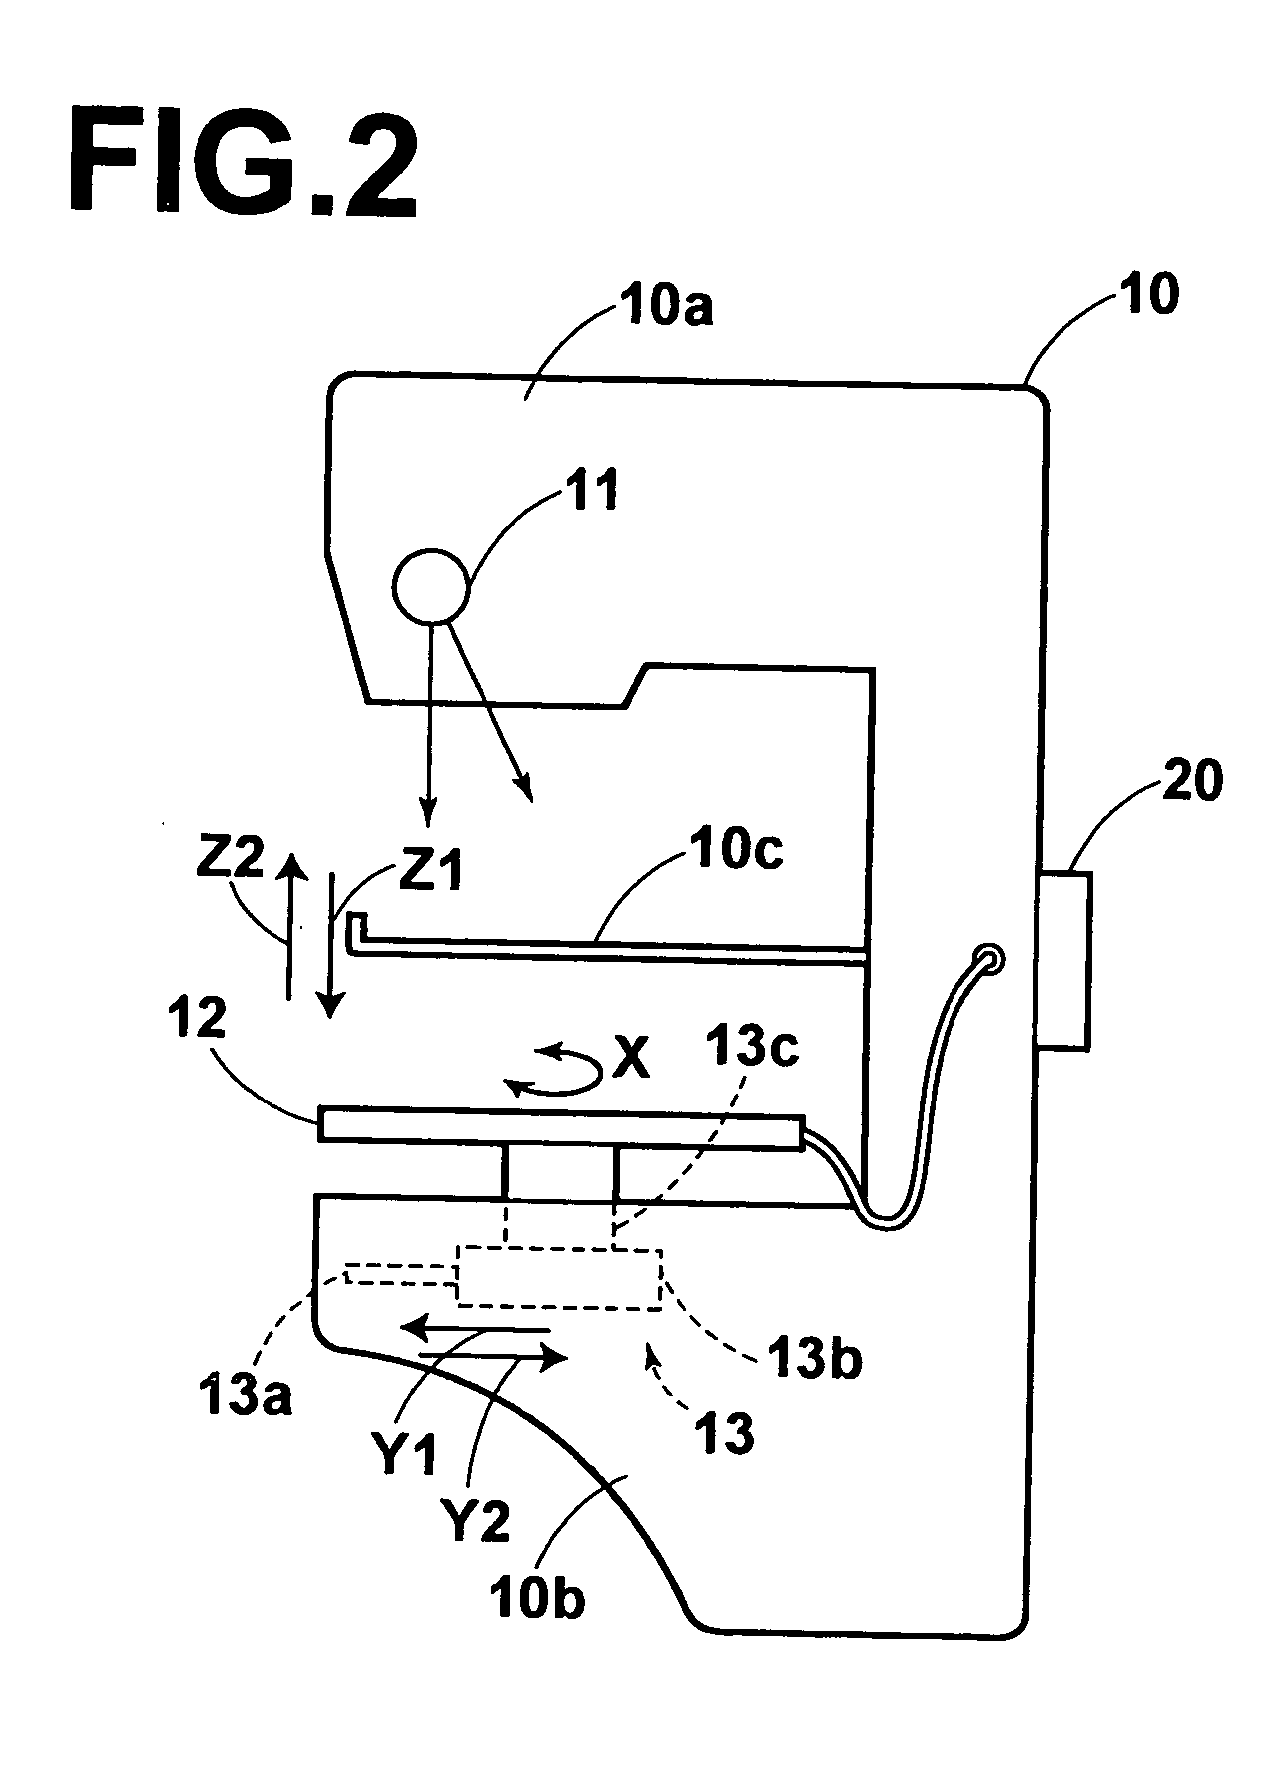 Mammogram recording and read-out apparatus